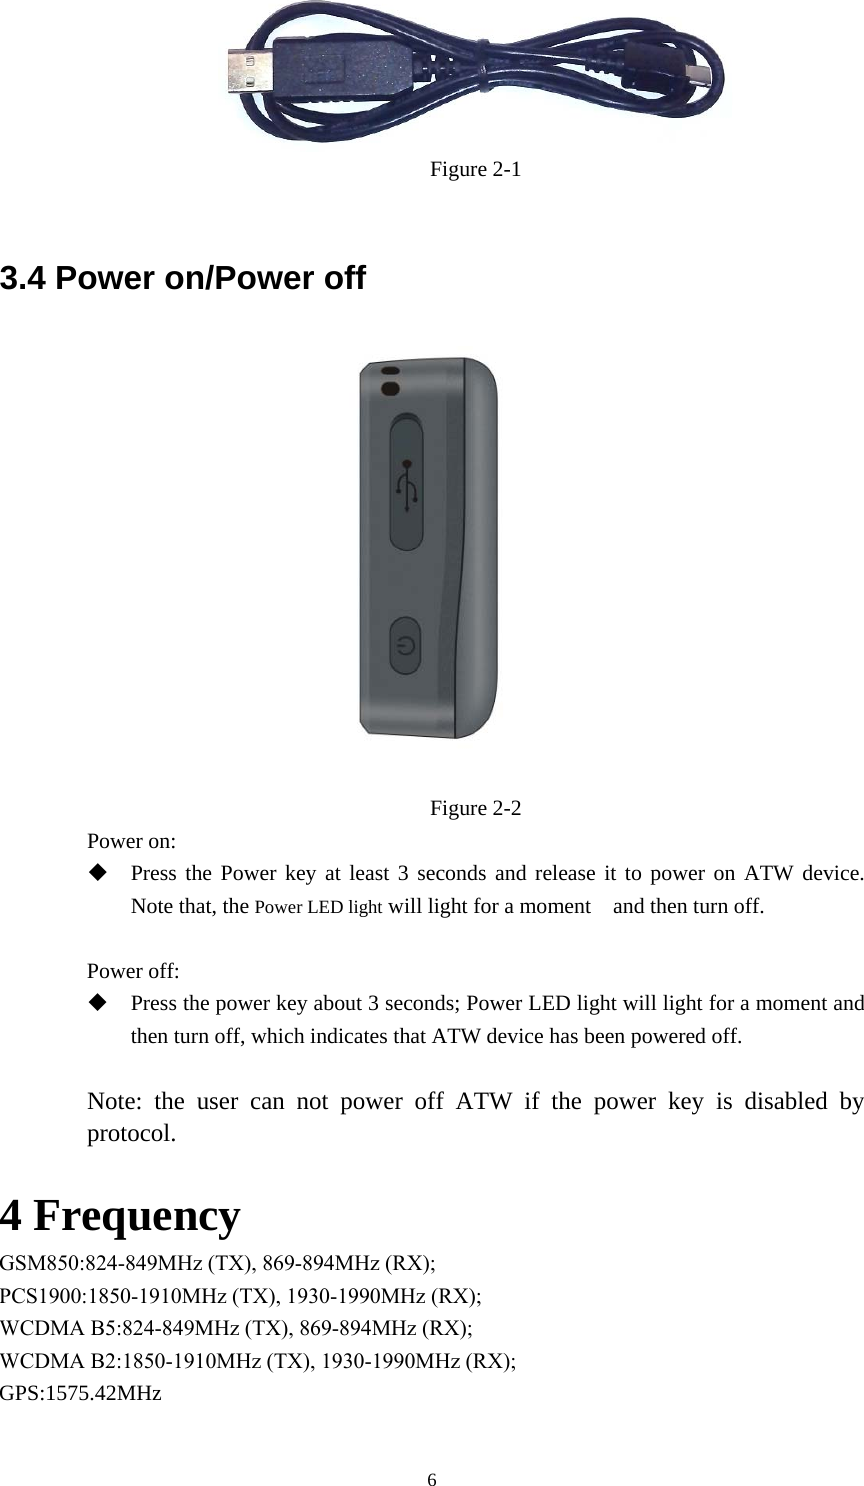 6Figure 2-1 3.4 Power on/Power off Figure 2-2 Power on:   Press the Power key at least 3 seconds and release it to power on ATW device.Note that, the Power LED light will light for a moment    and then turn off.Power off: Press the power key about 3 seconds; Power LED light will light for a moment andthen turn off, which indicates that ATW device has been powered off.Note: the user can not power off ATW if the power key is disabled by protocol.  4 Frequency GSM850:824-849MHz (TX), 869-894MHz (RX); PCS1900:1850-1910MHz (TX), 1930-1990MHz (RX); WCDMA B5:824-849MHz (TX), 869-894MHz (RX); WCDMA B2:1850-1910MHz (TX), 1930-1990MHz (RX);GPS:1575.42MHz 